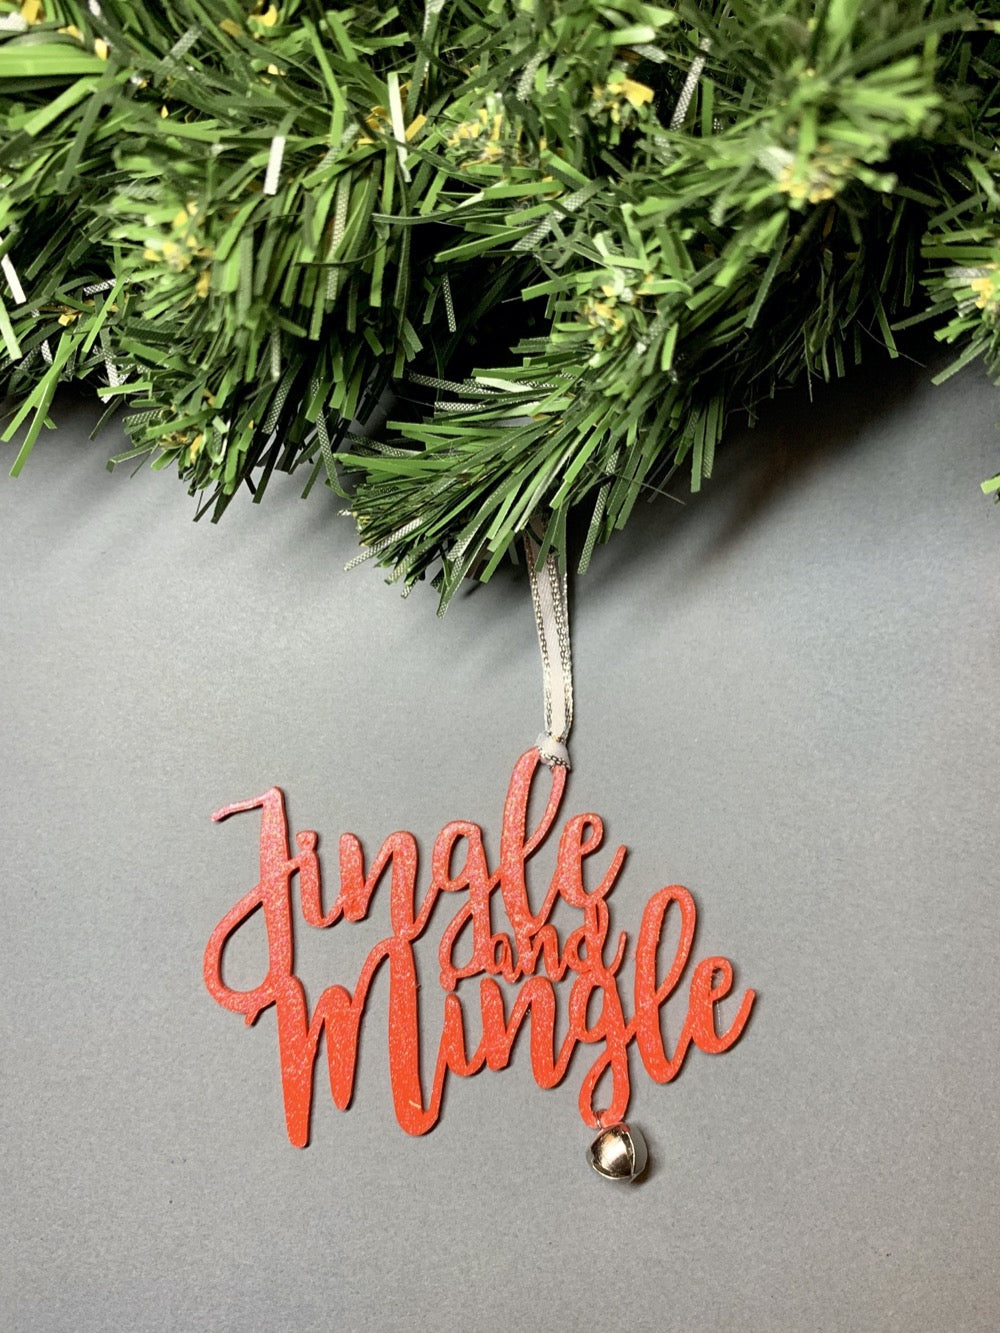 On a grey background and hanging from a green wreath is a 3D printed R+D ornament. It is a cursive text with a jingle bell and covered in glitter to make it shimmer and shine in the light. This ornament reads, Jingle and Mingle.